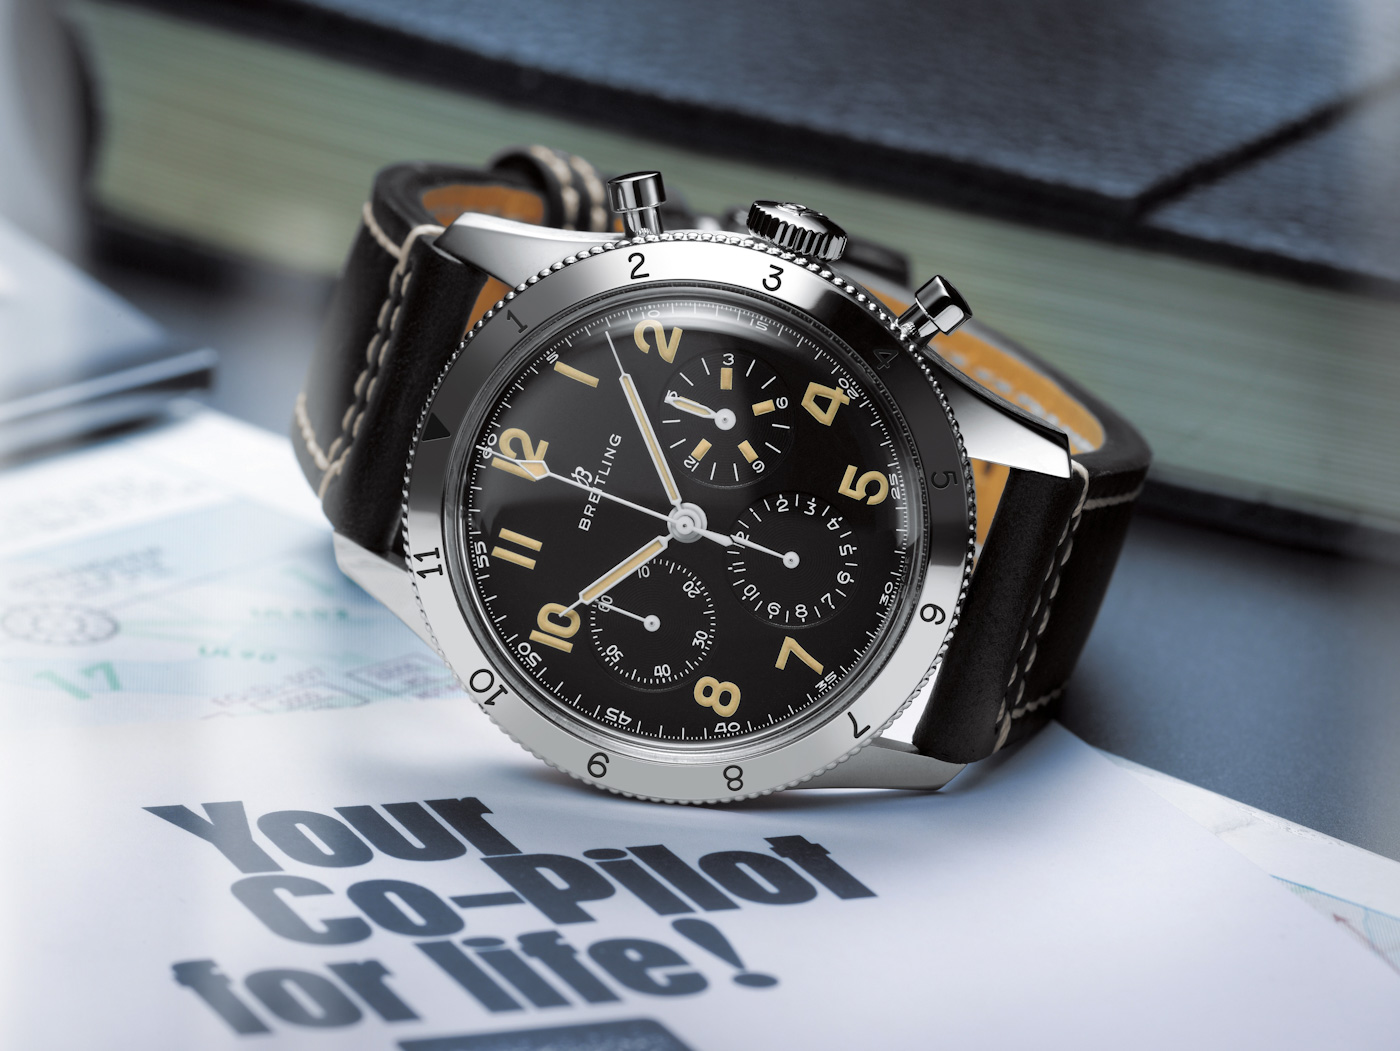 Breitling Revives The Legendary AVI Ref. 765 With Three New Limited-Edition Models